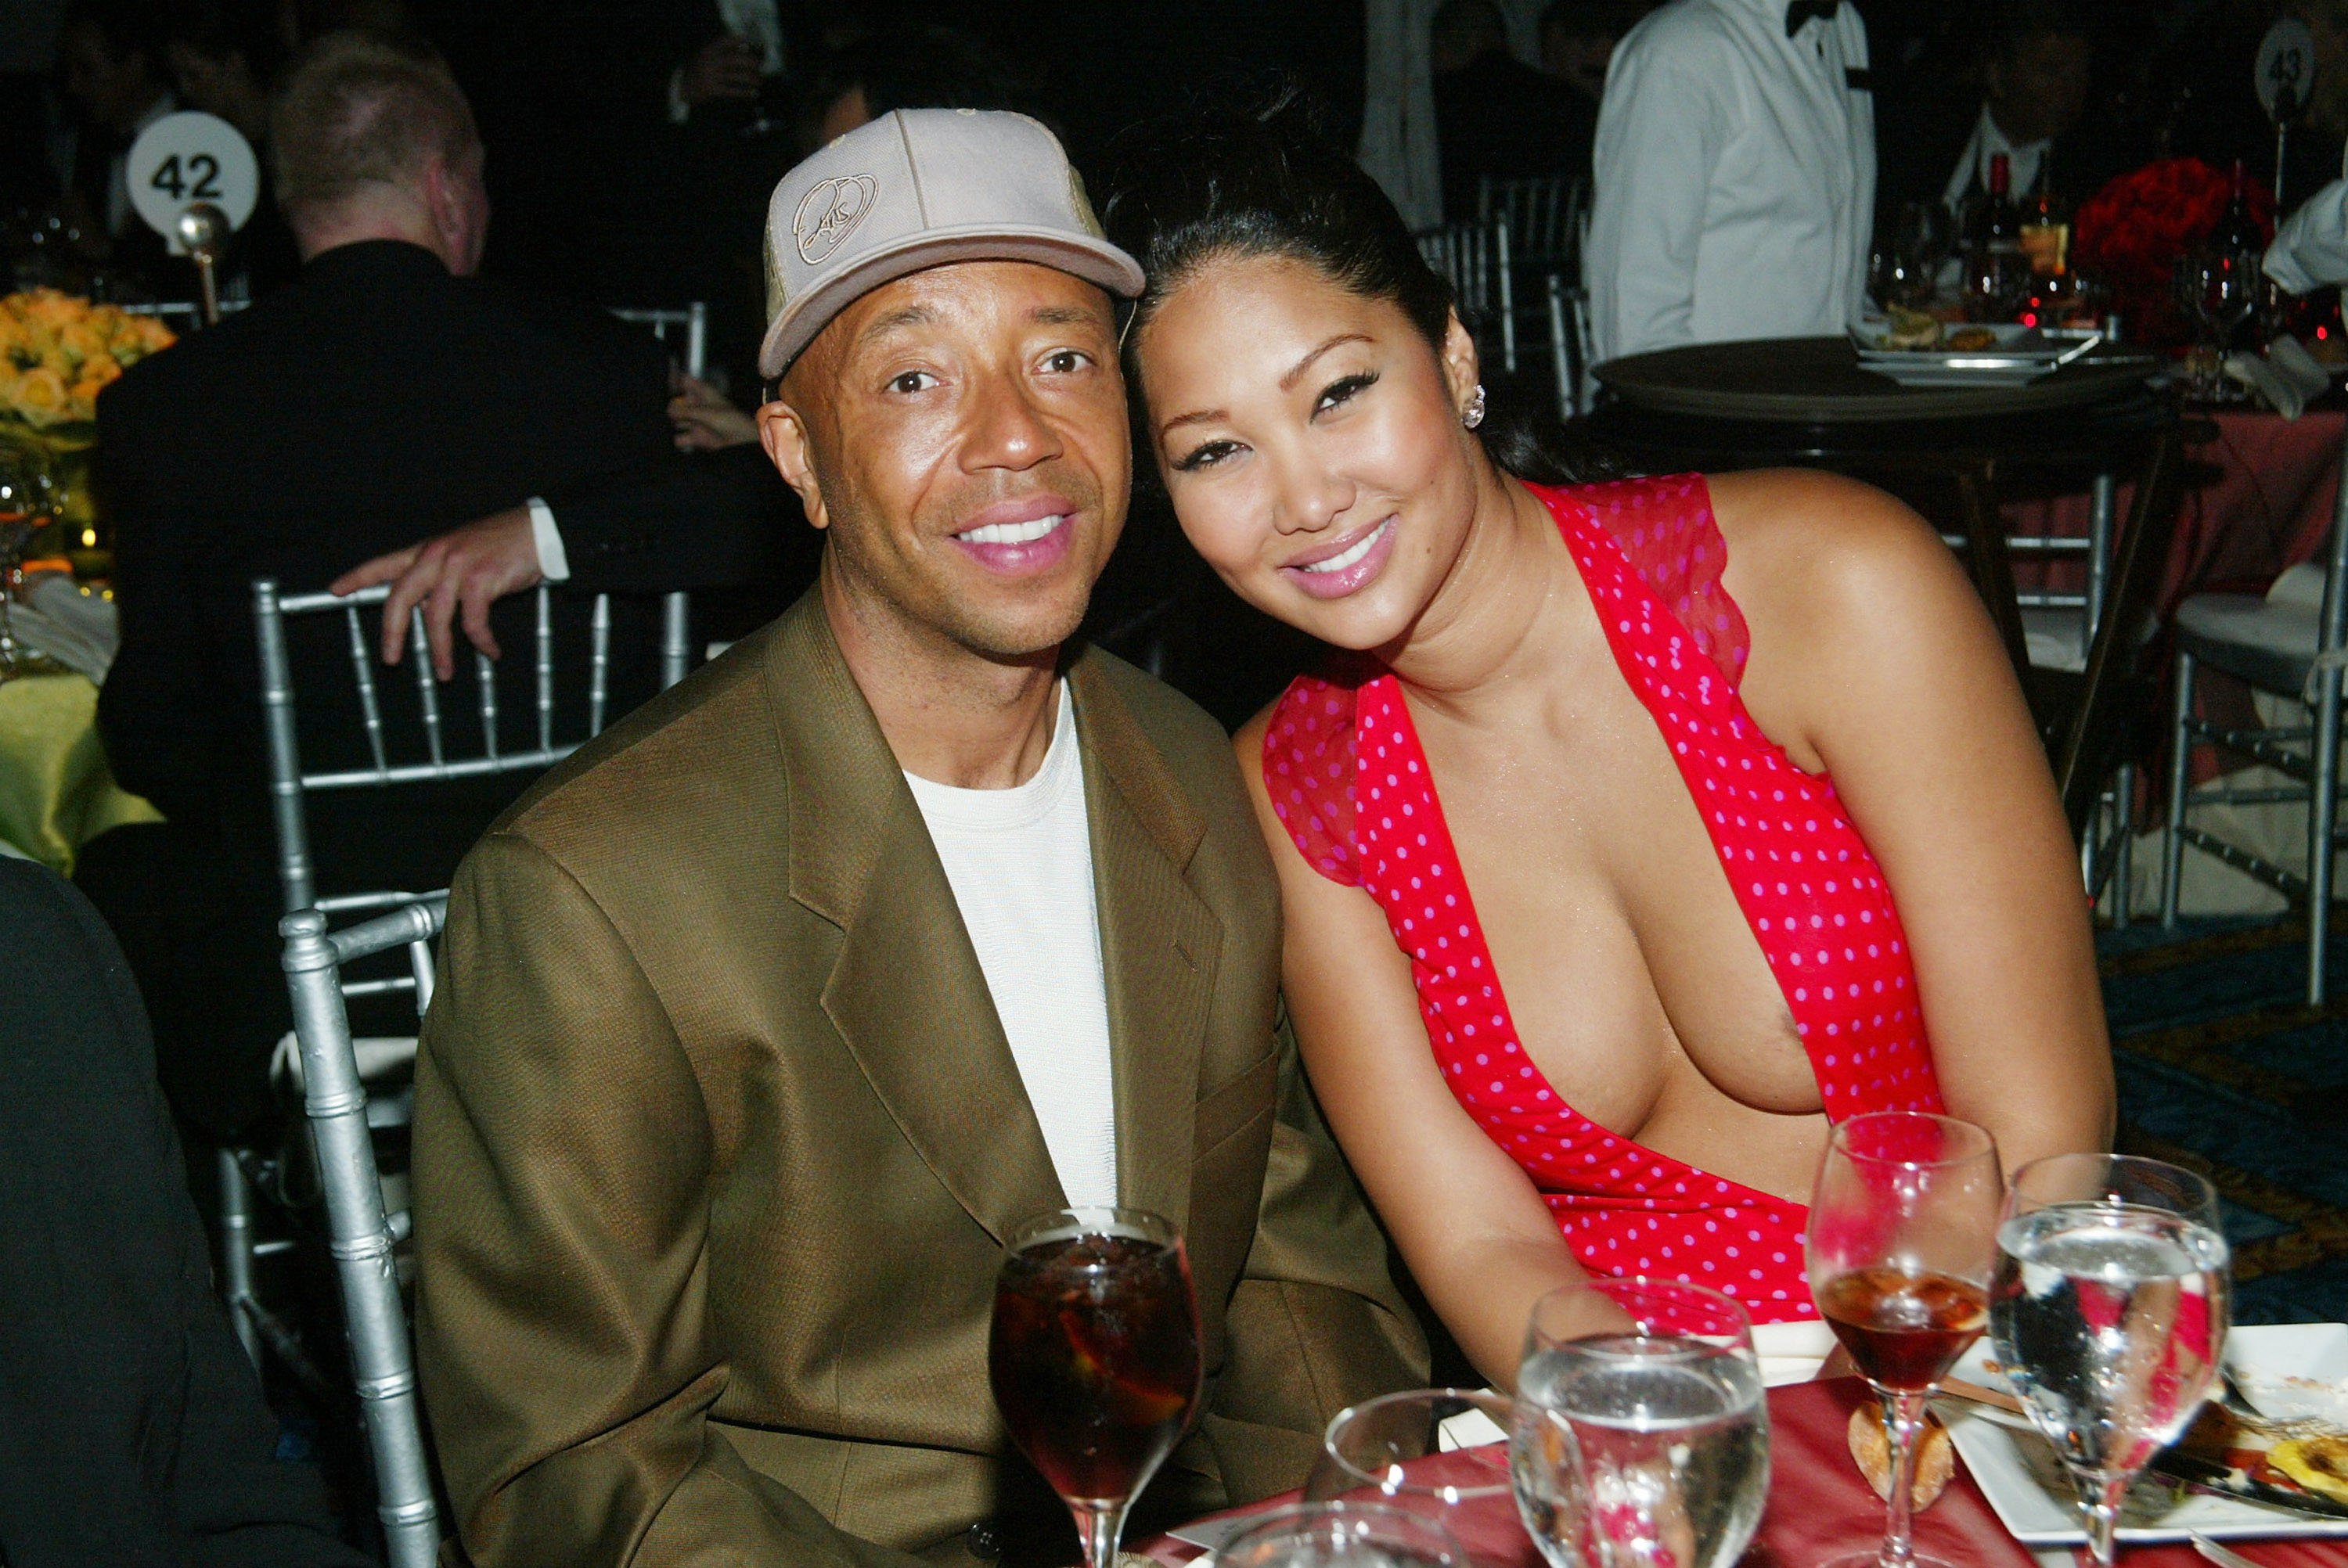 Kimora Lee Simmons at the Tony Awards Dinner with ex husband, Russel Simmons on June 8, 2003. | Photo: Getty Images.